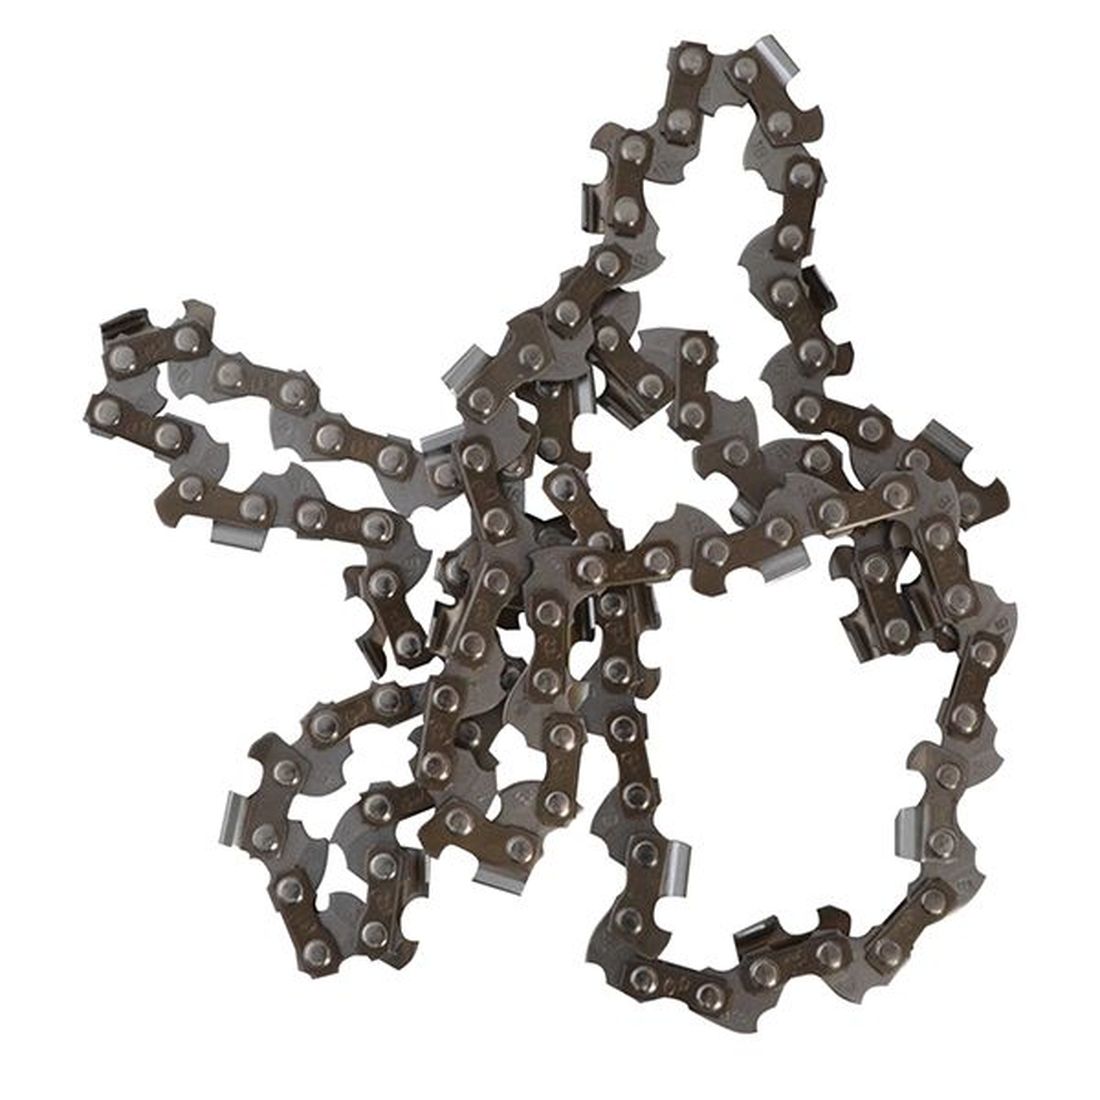 ALM CH053 Chainsaw Chain 3/8in x 53 Links 1.3mm - Fits 35cm Bars                    